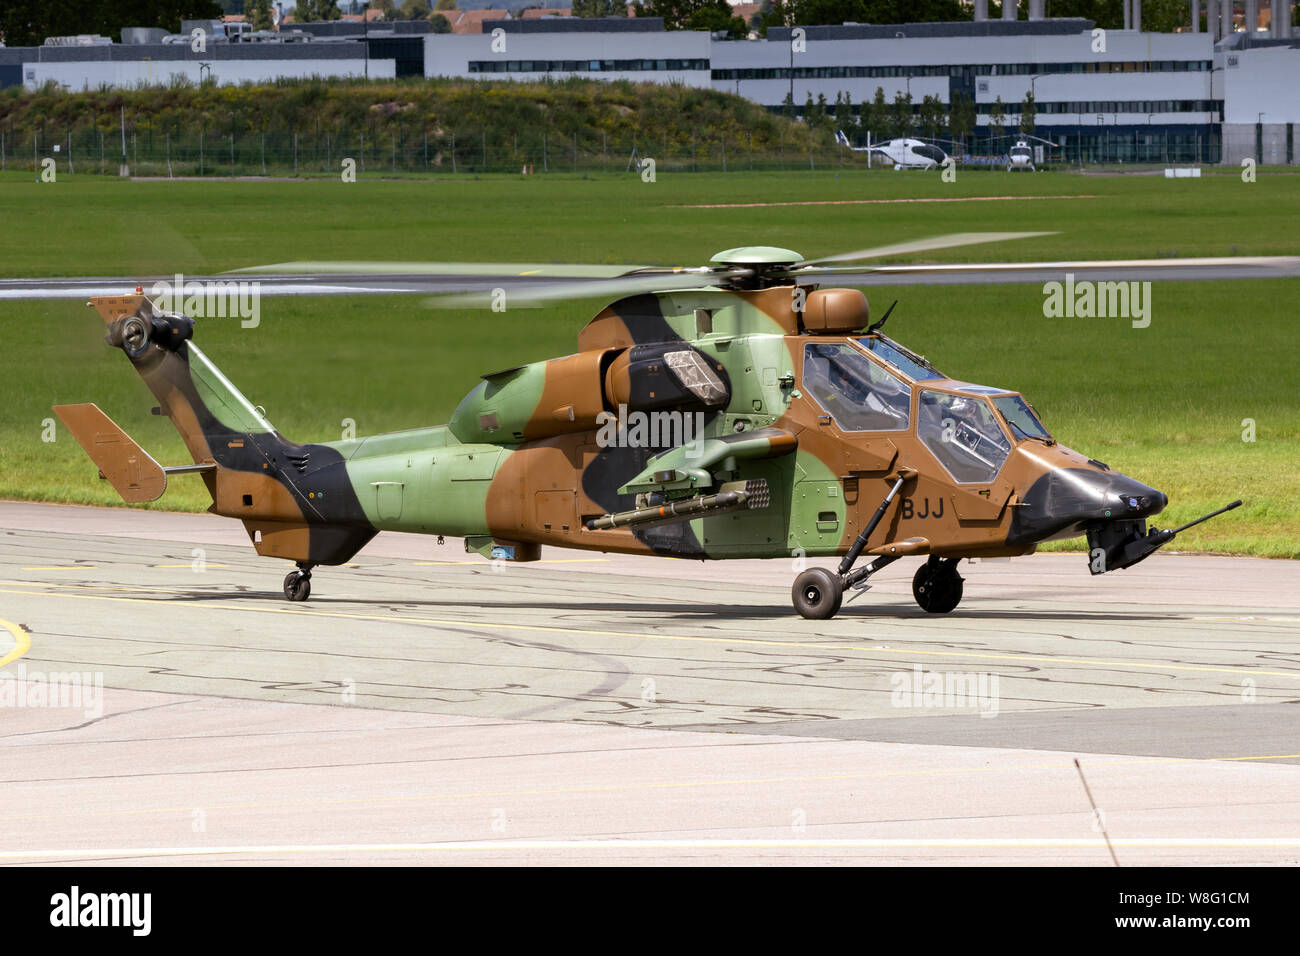 LE BOURGET PARIS - JUN 21, 2019: French Army Eurocopter Airbus EC-665 Tiger attack helicopter at the Paris Air Show. Stock Photo